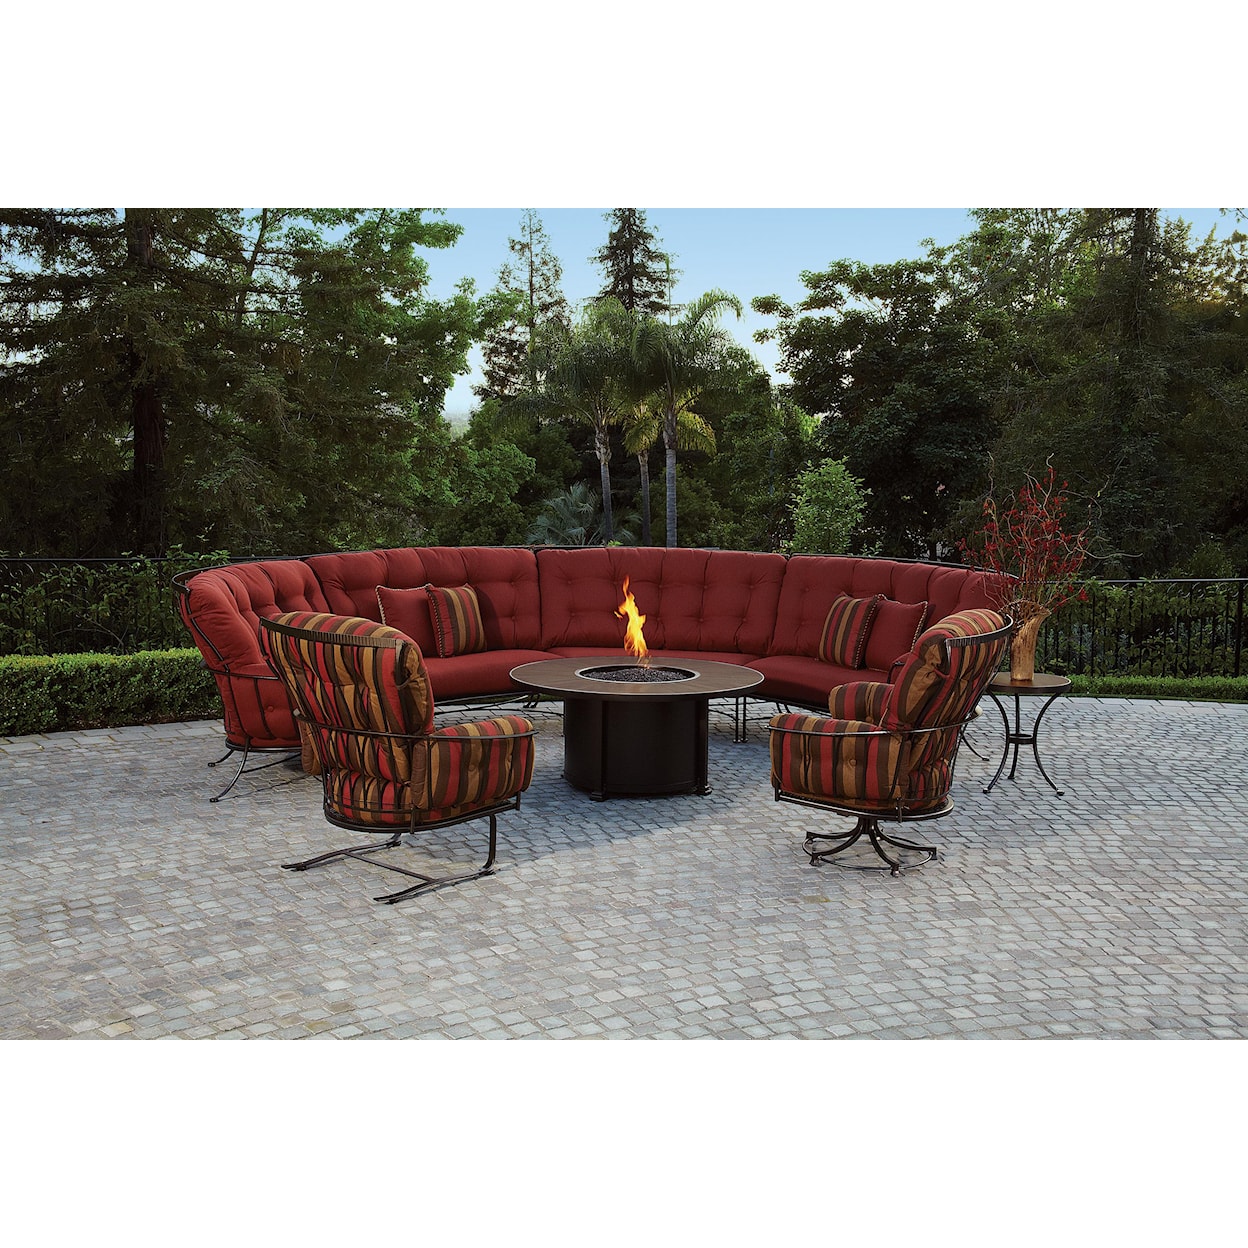 O.W. Lee Monterra  6 Pc. Outdoor Room Group